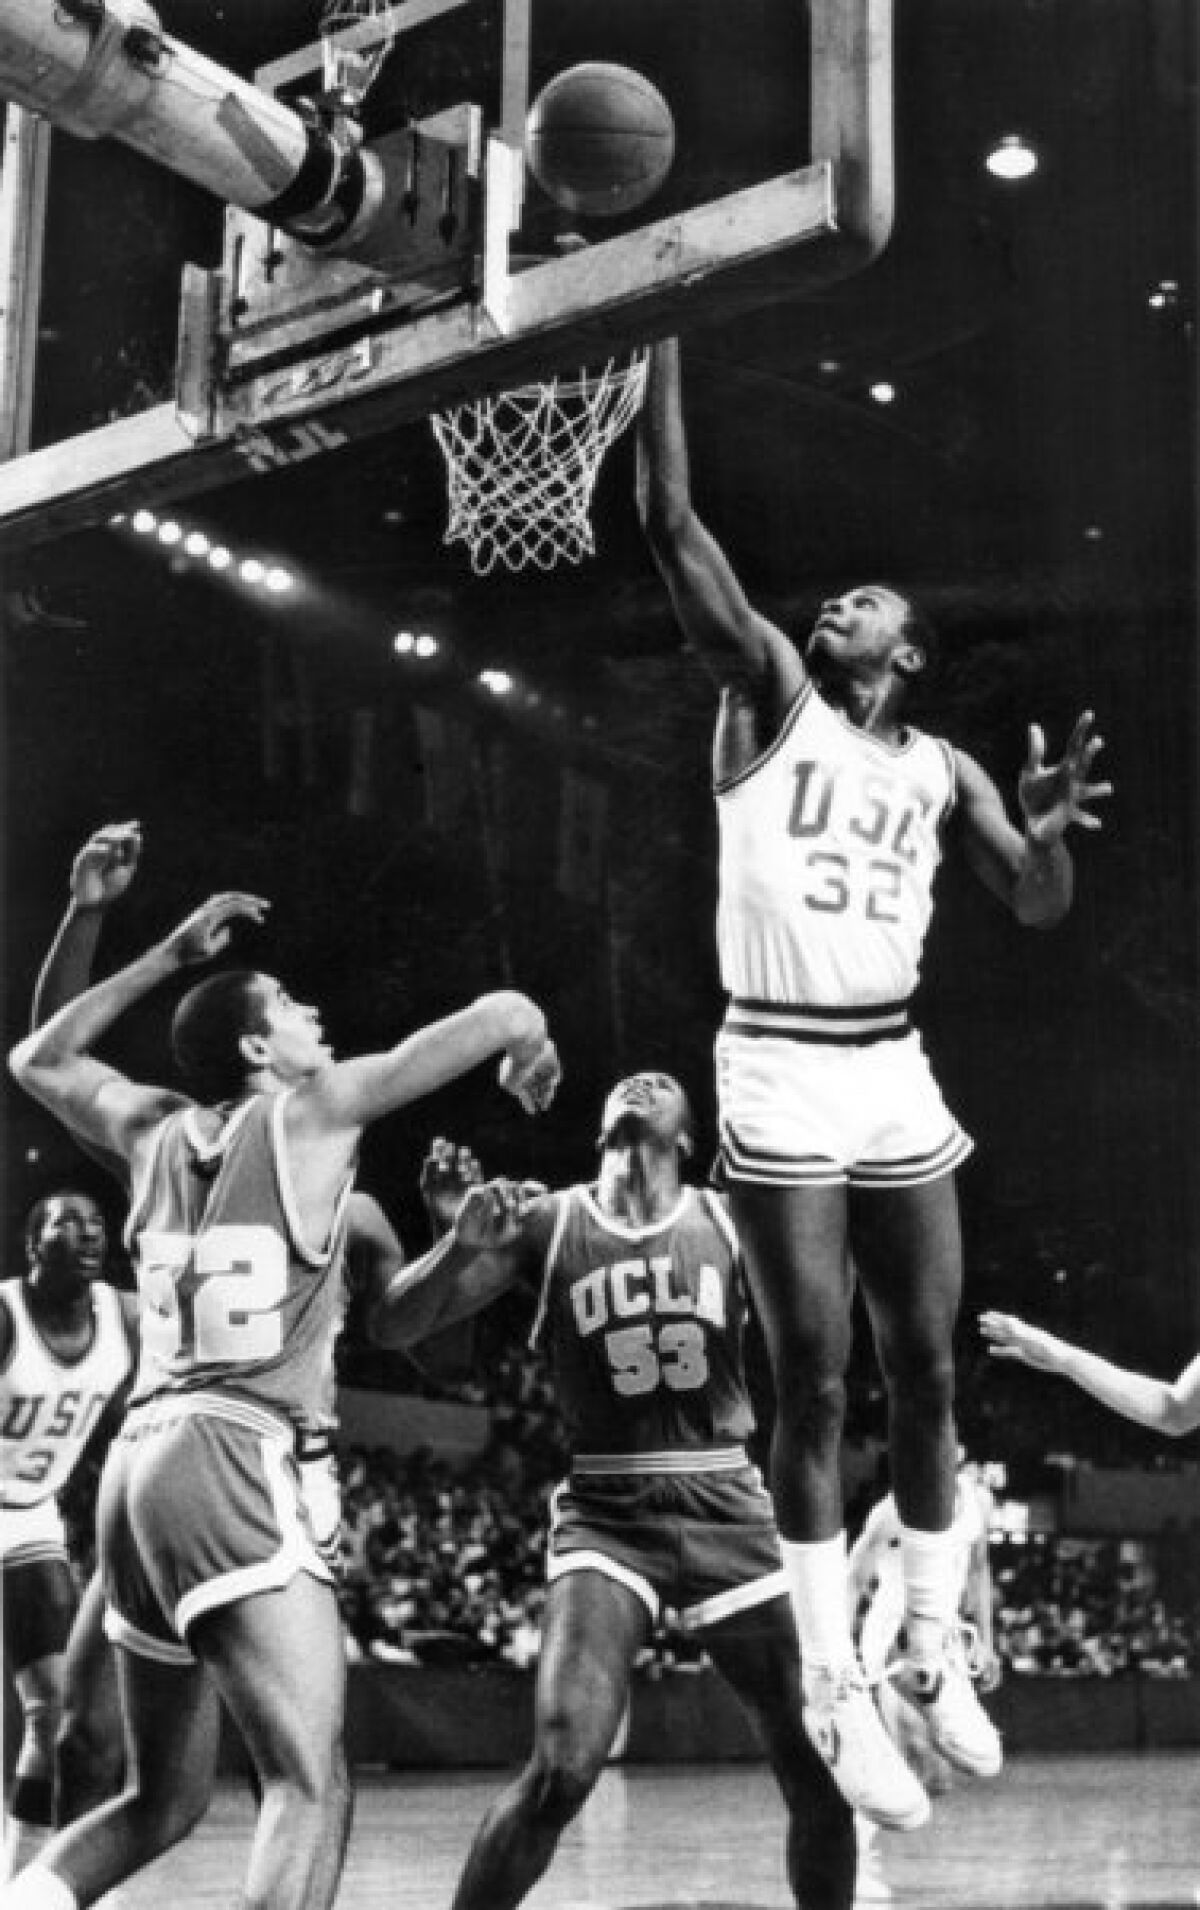 Ron Holmes was a guard on the USC basketball team in the 1980s. Shown scoring against crosstown rival UCLA in February 1985, Holmes did not make it to the NBA, but he was already thinking about his future children's career choices.